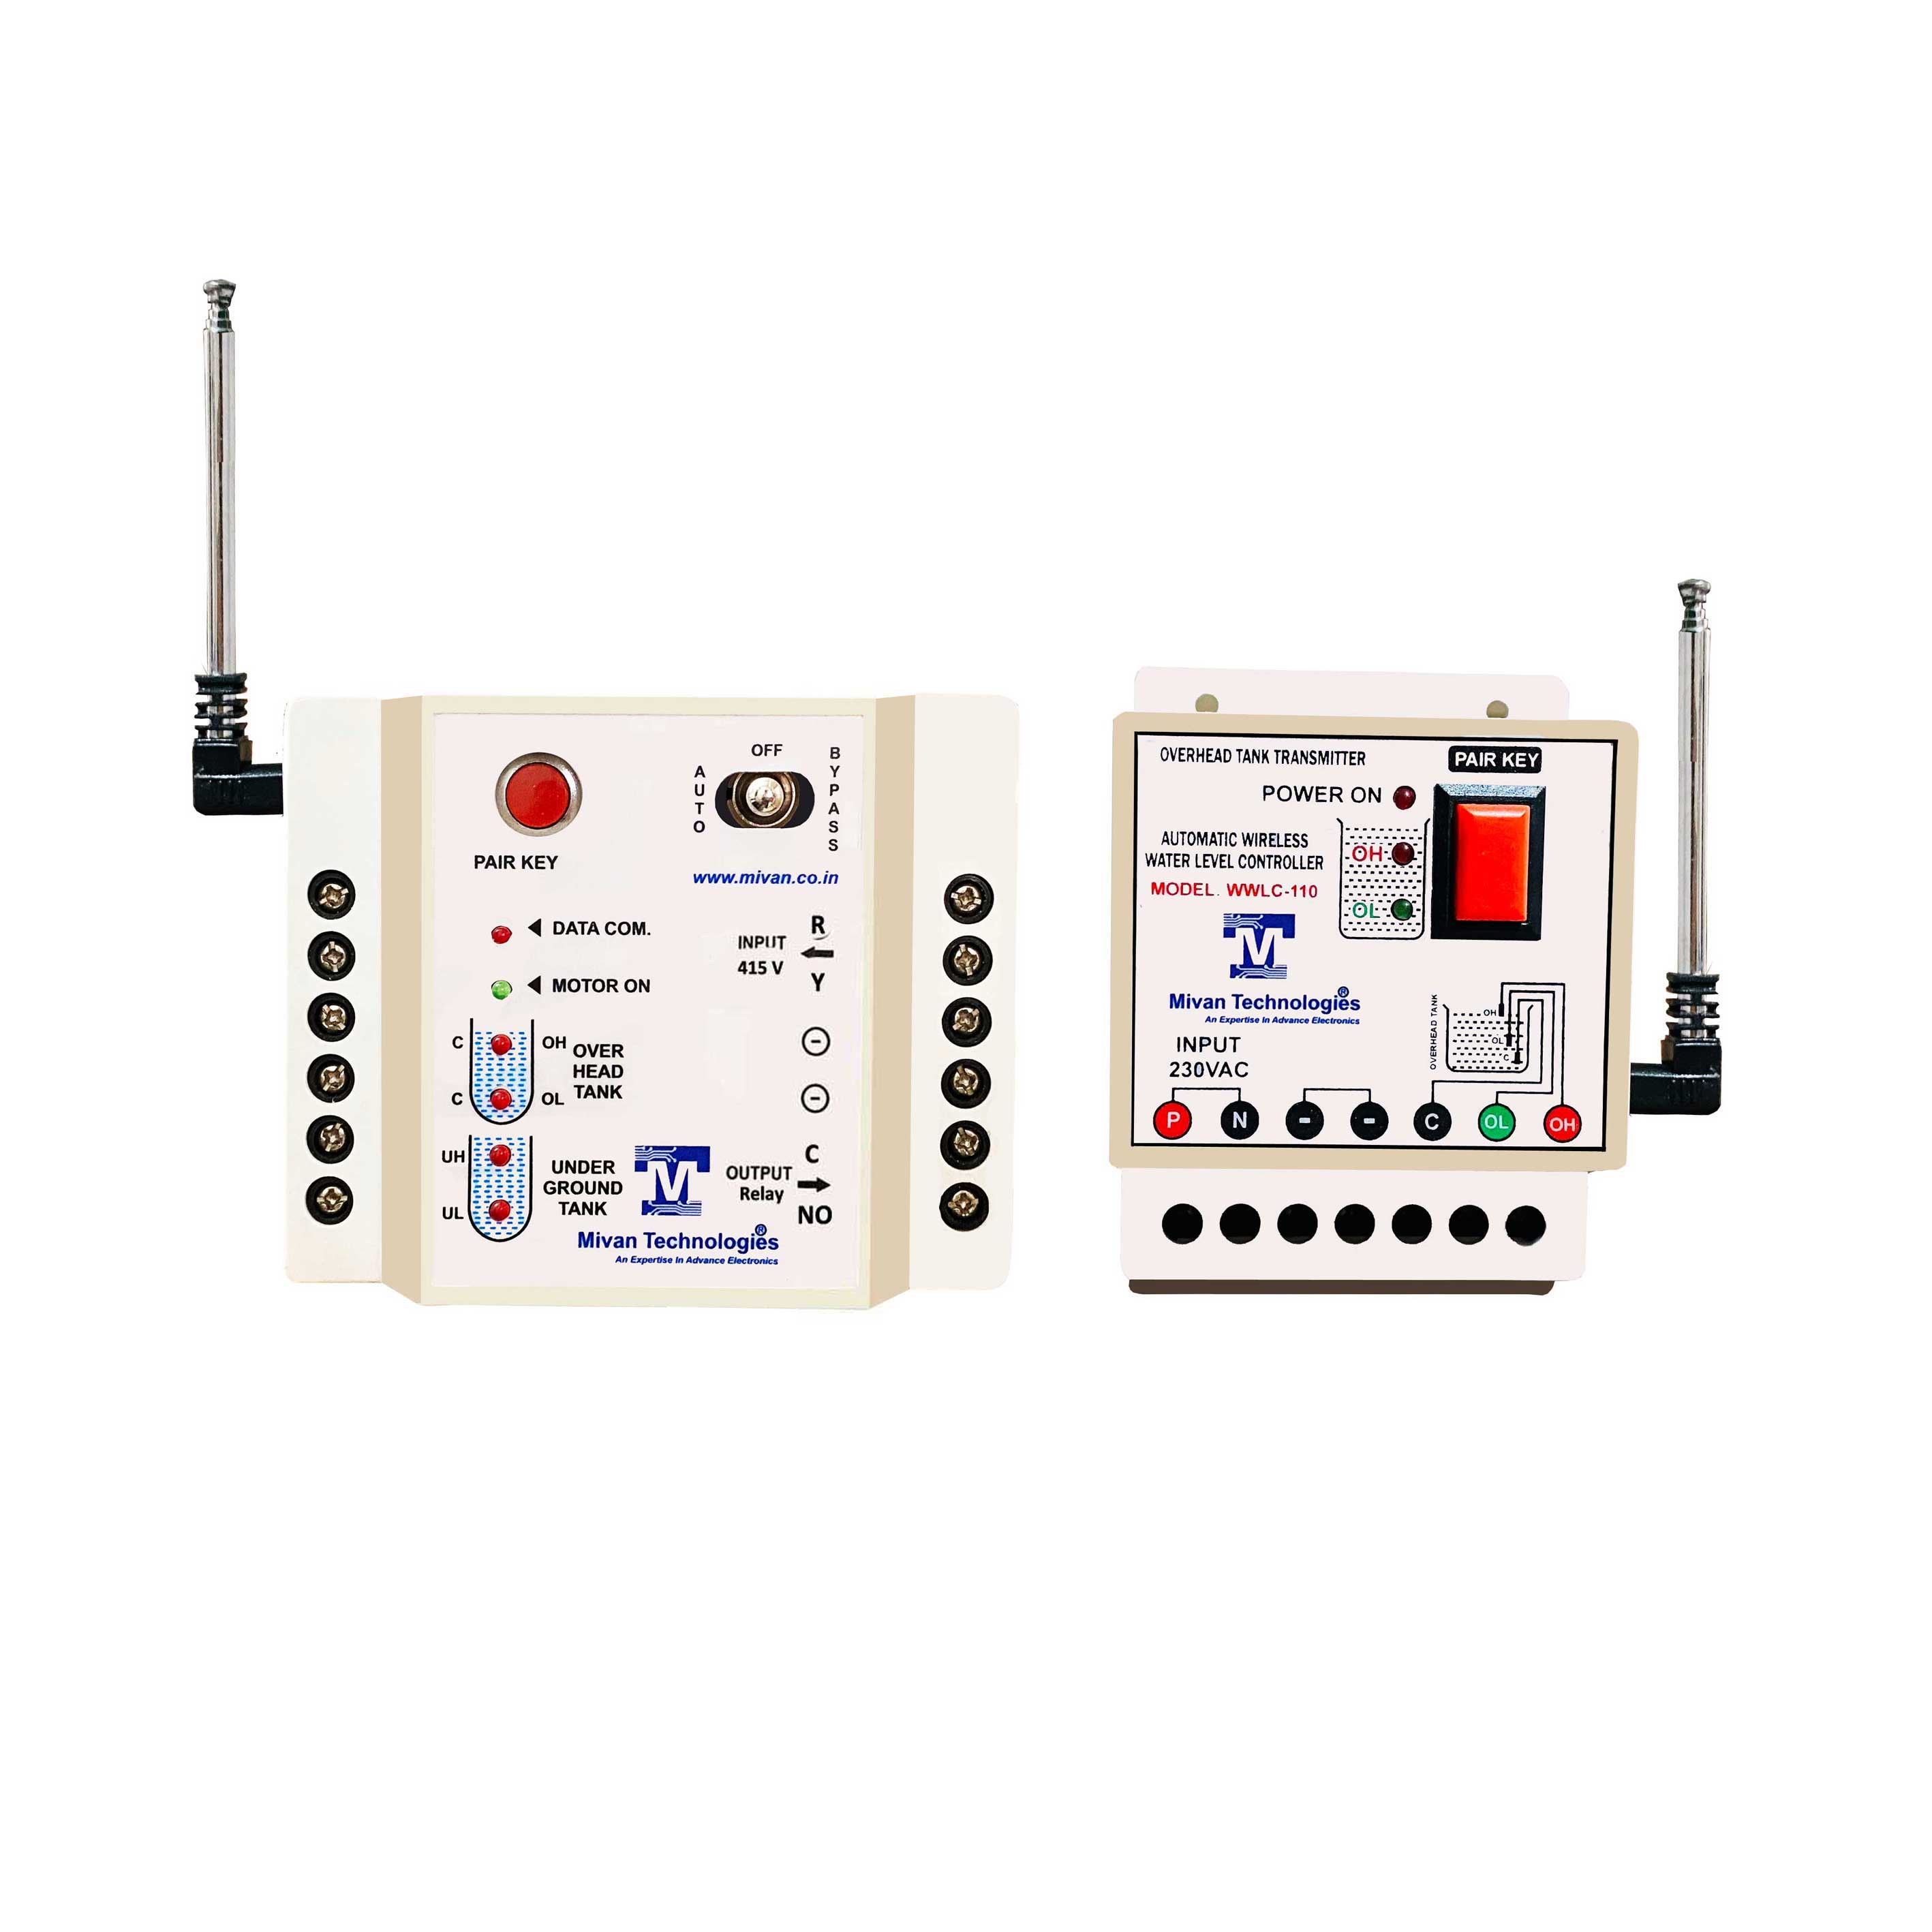 WLLC 3 wireless water level controller for 3 phase motor For Up and Down Tank With 6 Sensors with dry run protection